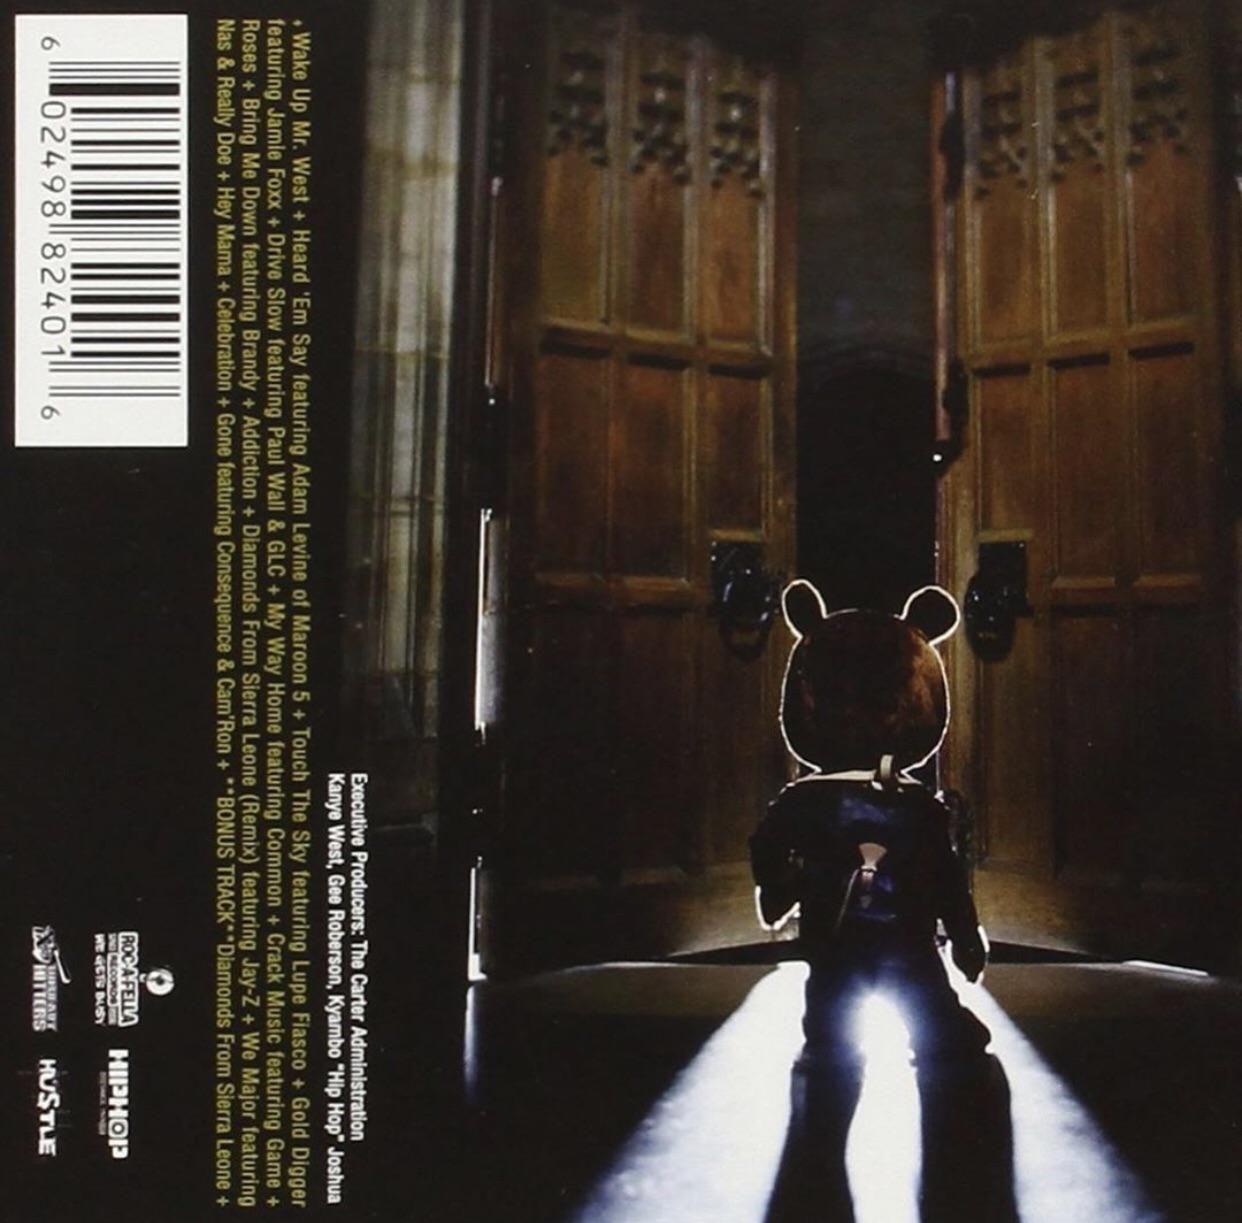 The back of Late Registration album cover. Late registration, Album covers, Event location